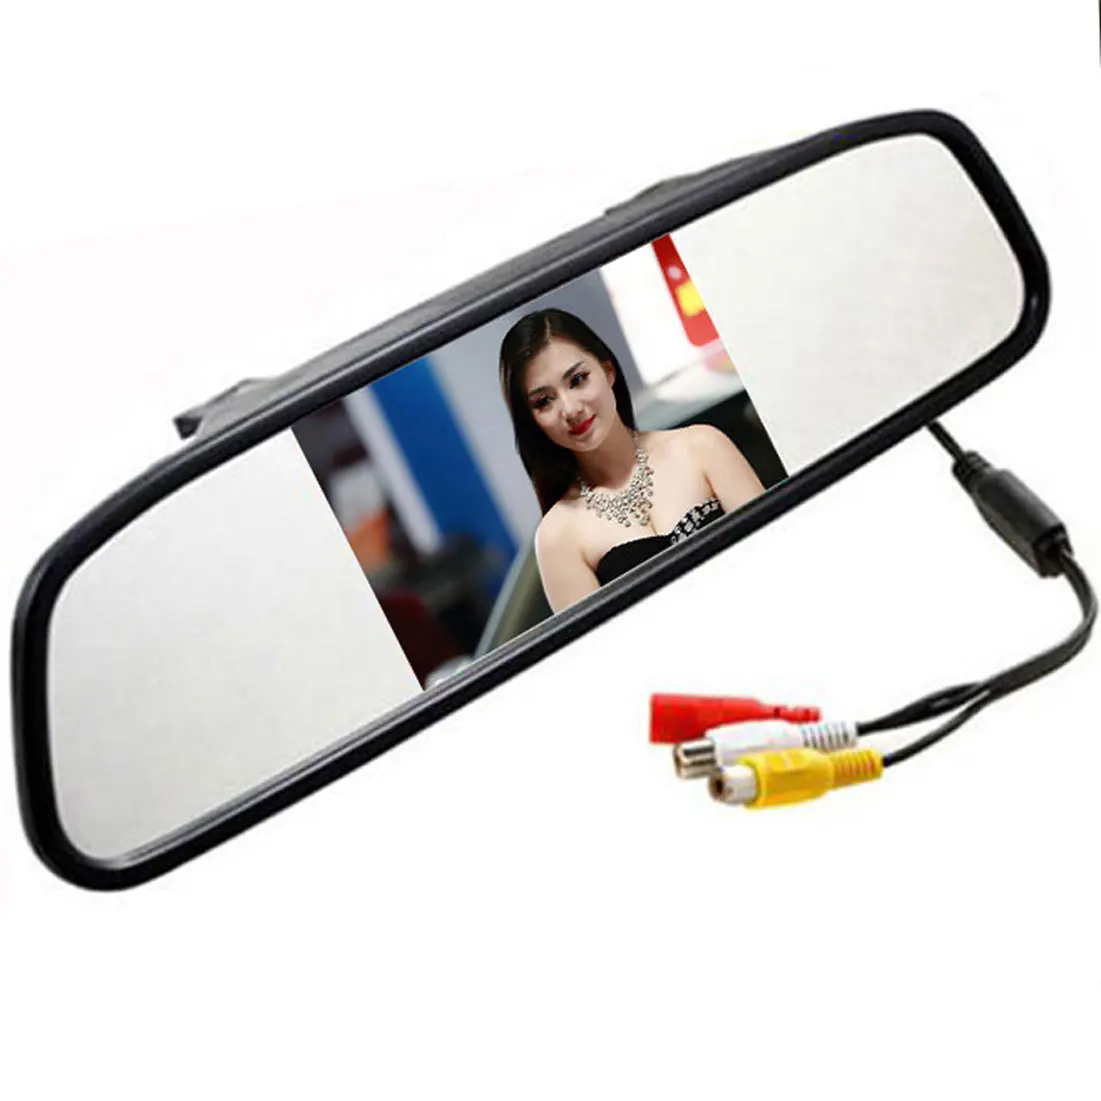 

Monitor 5" Color TFT LCD Car Rearview Mirror Monitor 5 inch 16:9 screen DC 12V Car Monitor for DVD Camera VCR